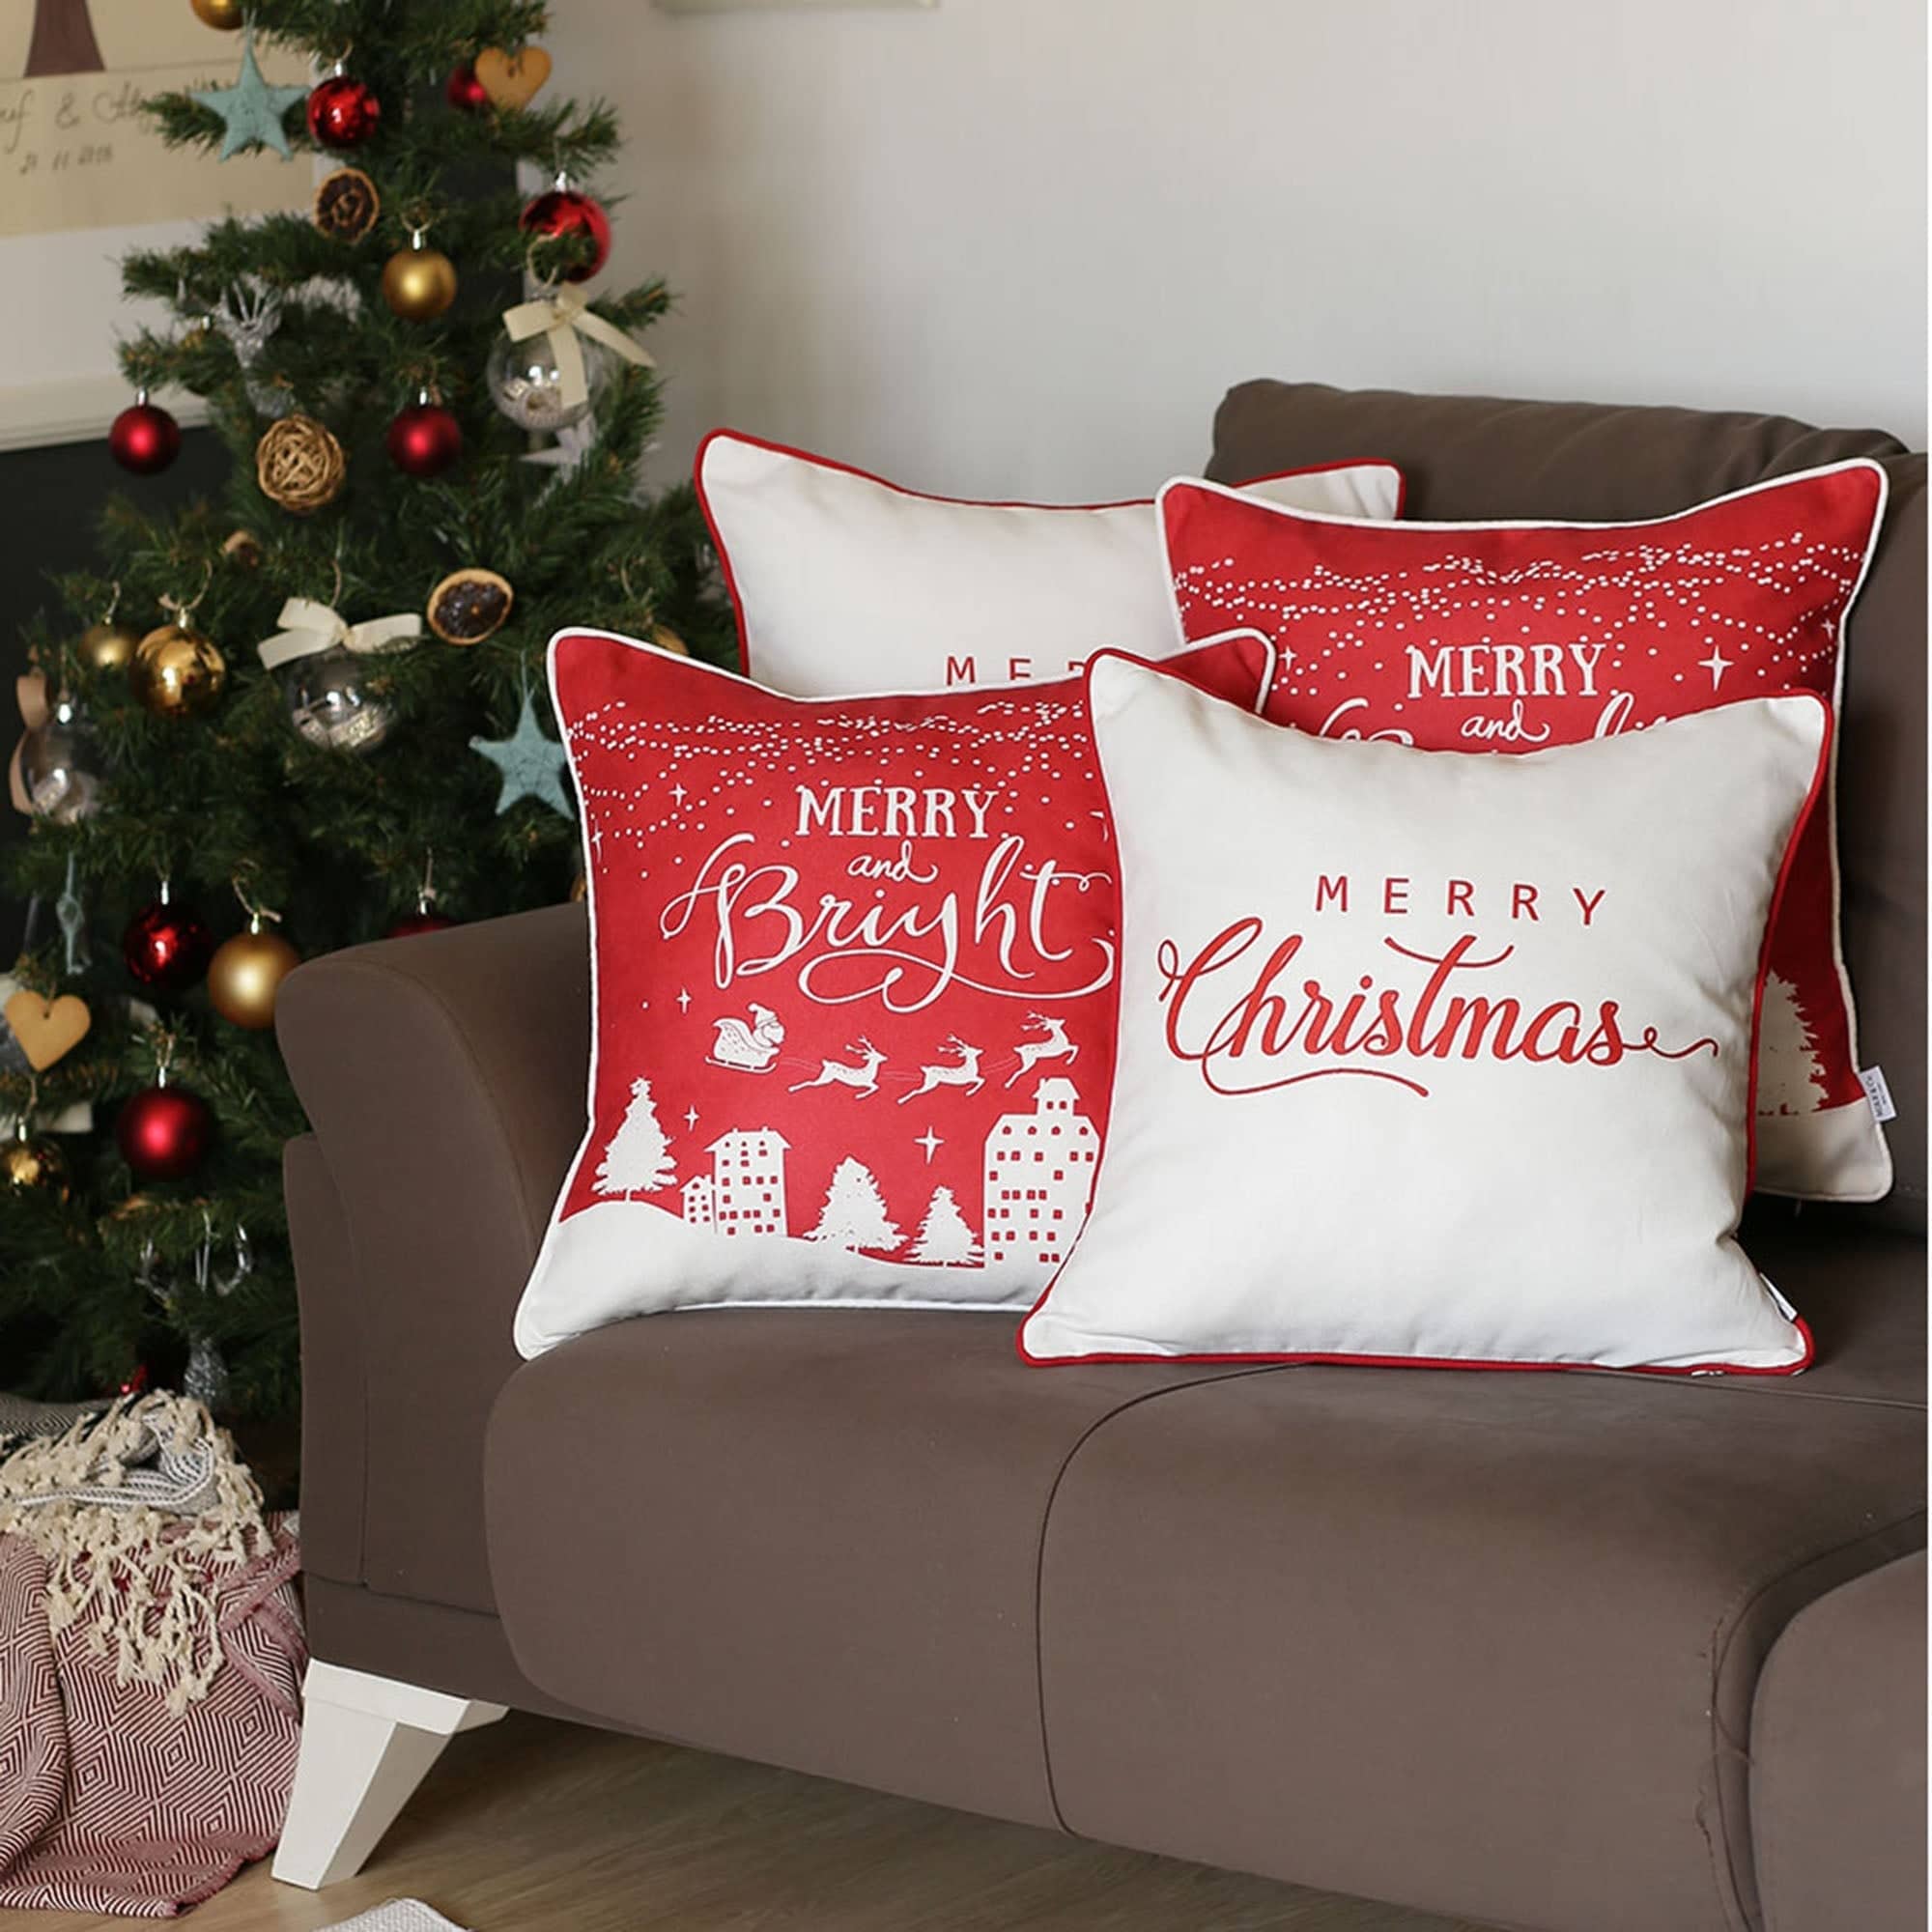 https://ak1.ostkcdn.com/images/products/is/images/direct/c06614eb311b28111bd6e72b378d9058d7d988a1/Merry-Christmas-Decorative-Throw-Pillow-Square-Set-of-4.jpg